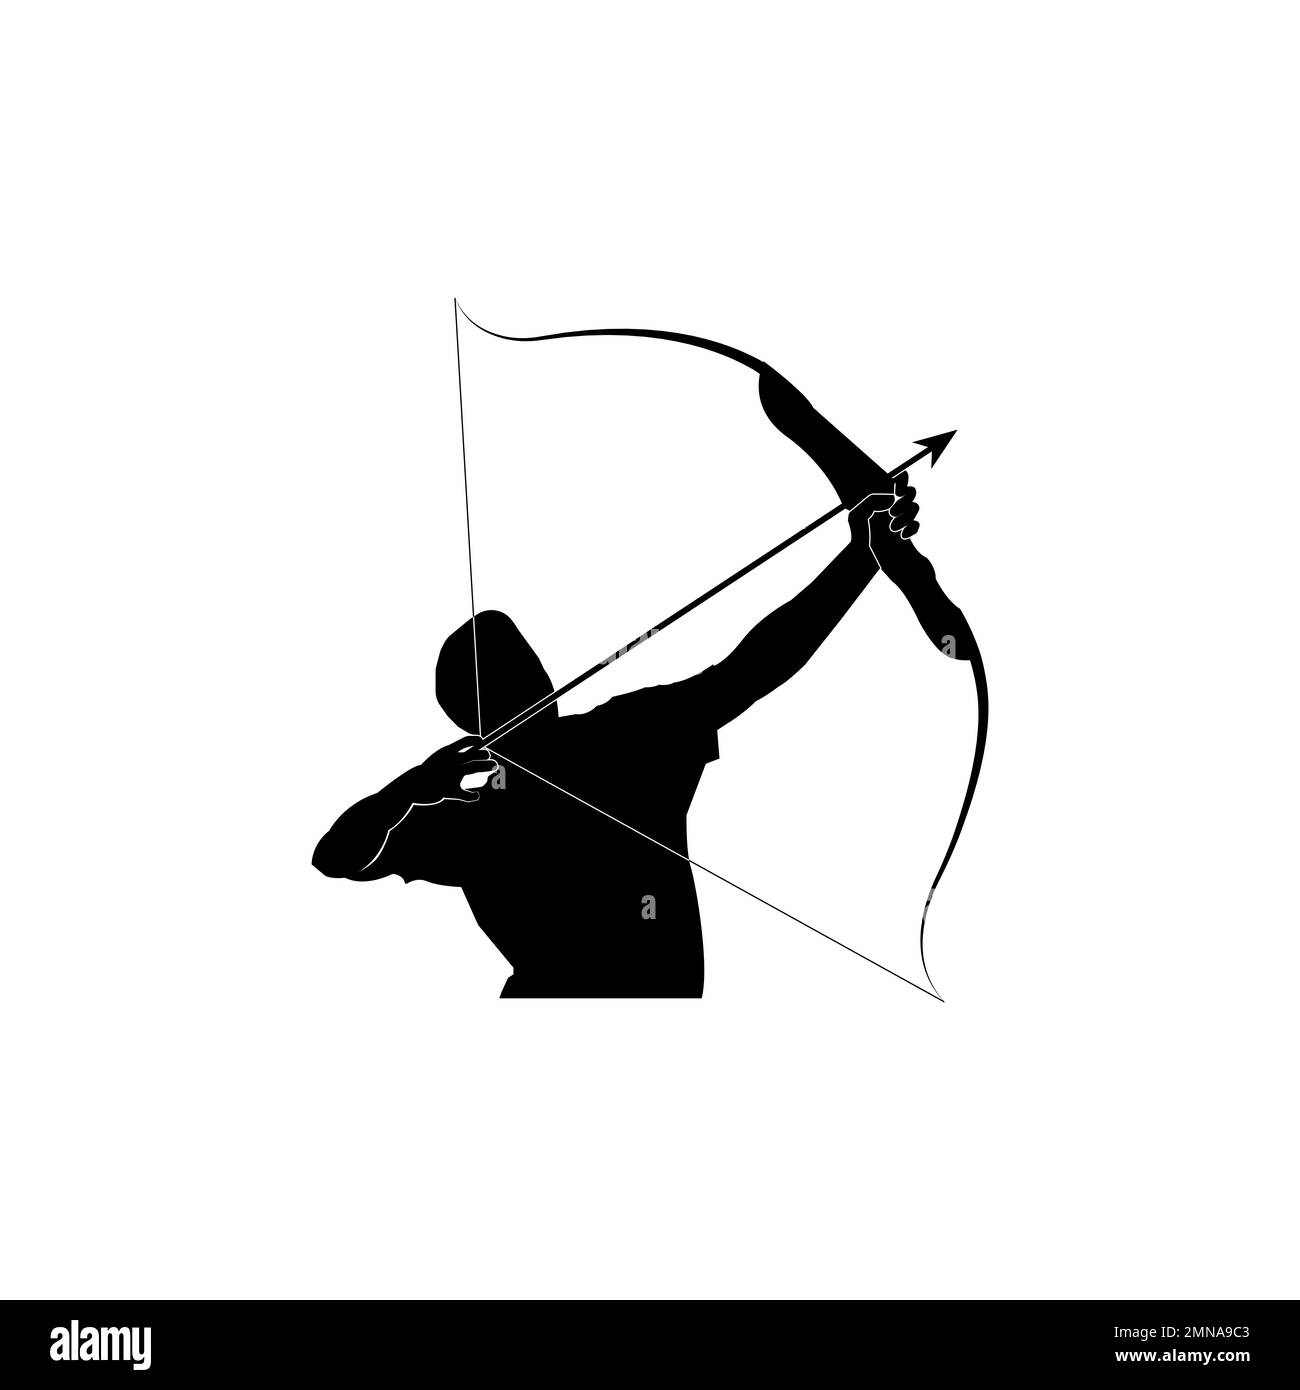 icon of a person aiming with a bow,vector illustration logo template. Stock Photo